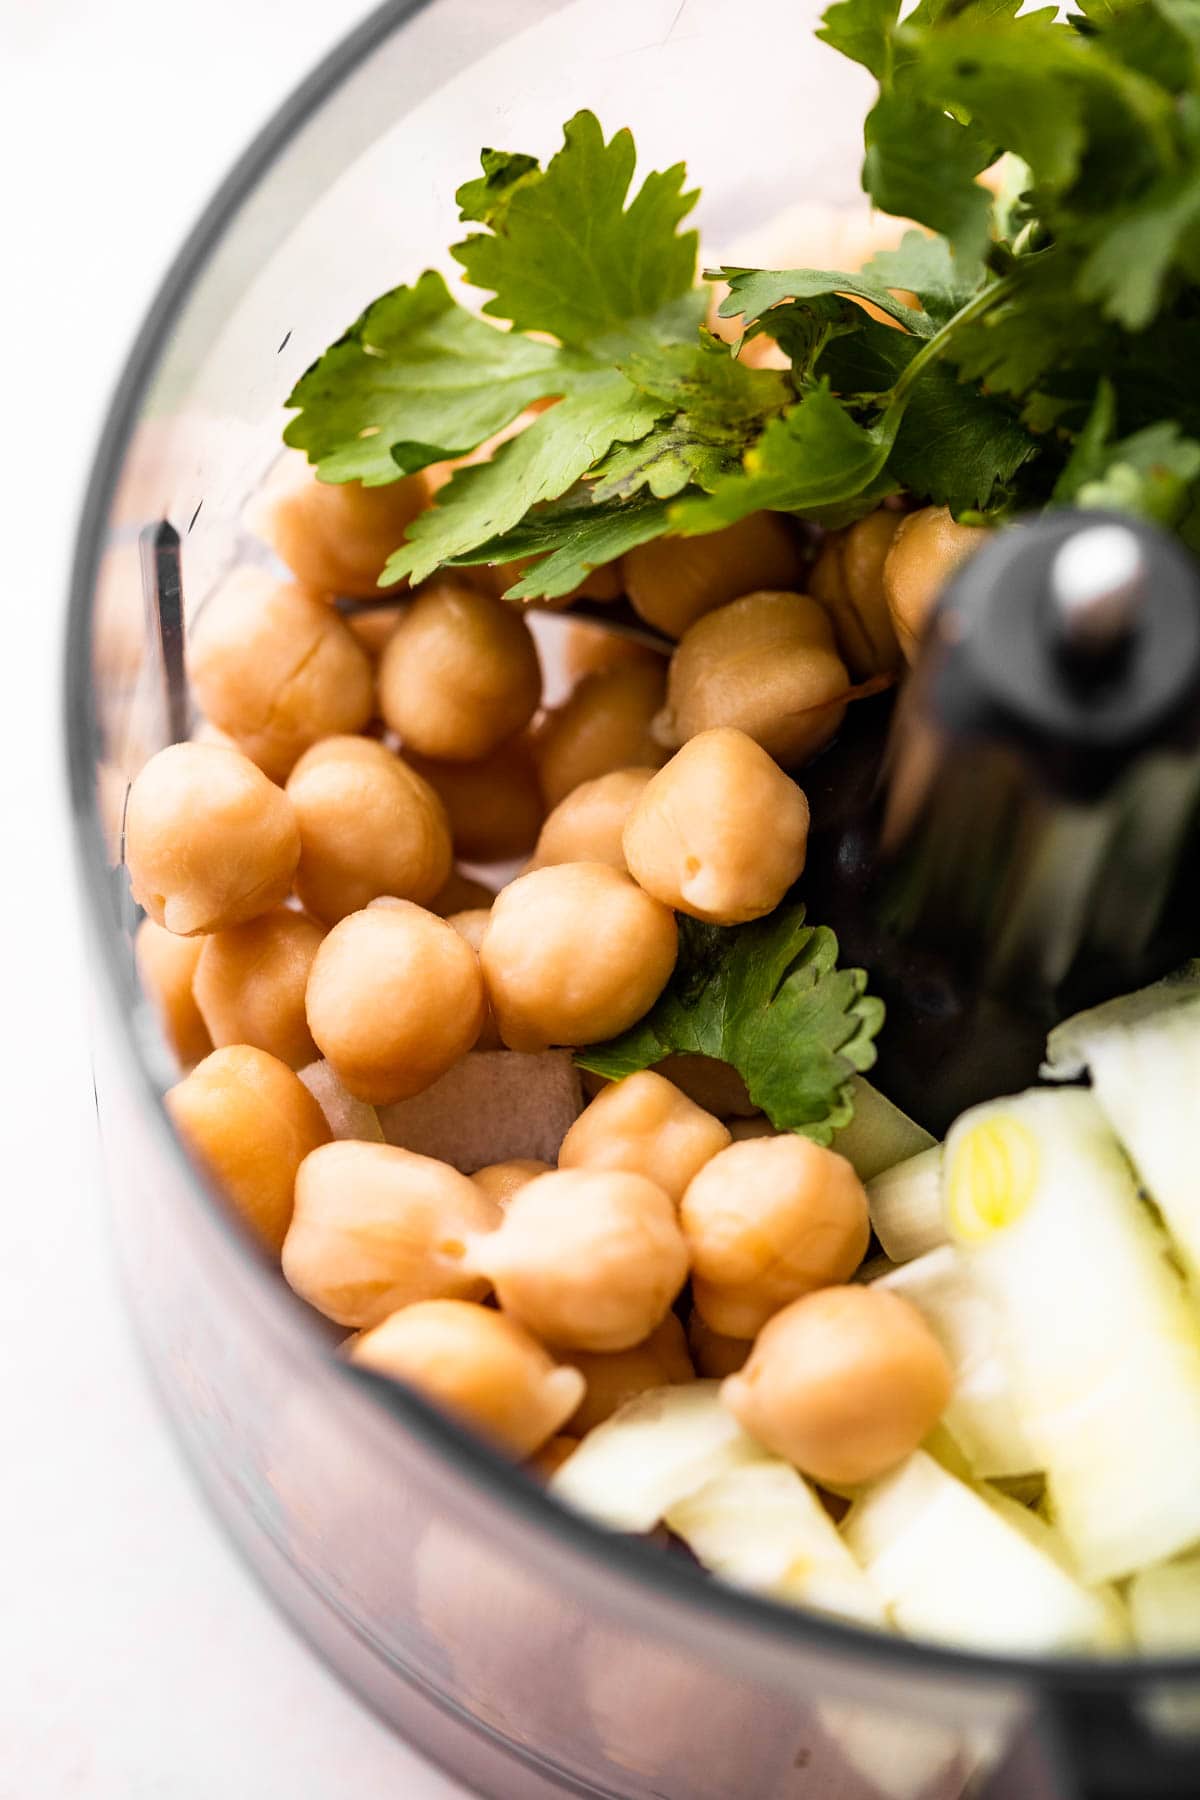 Chickpeas and cilantro leaves in a food processor.